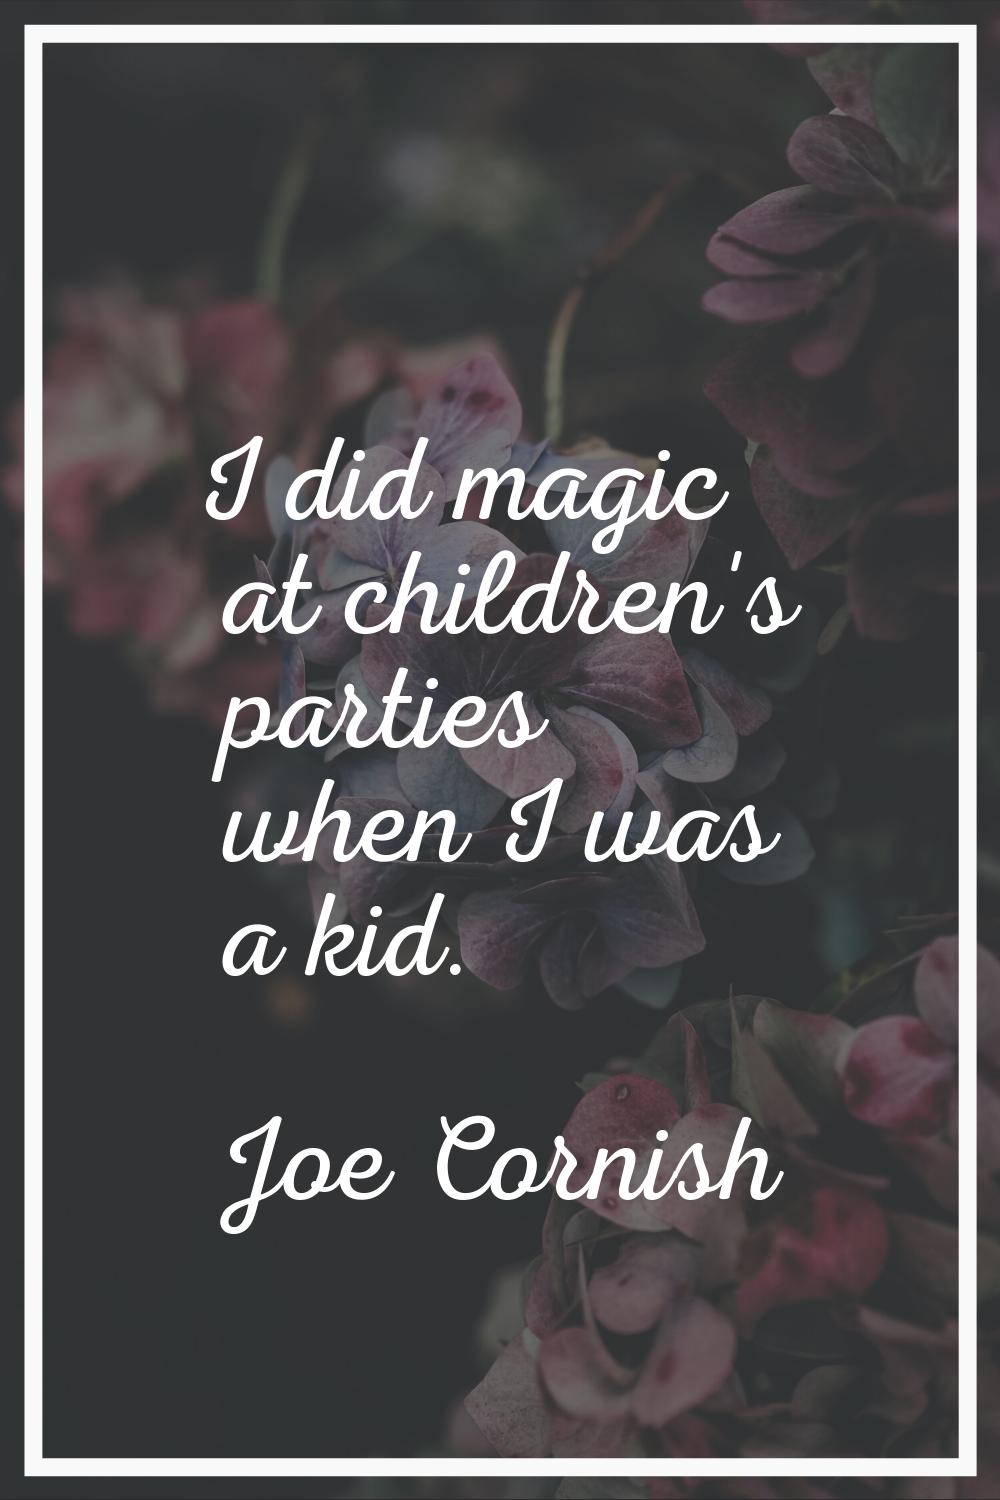 I did magic at children's parties when I was a kid.